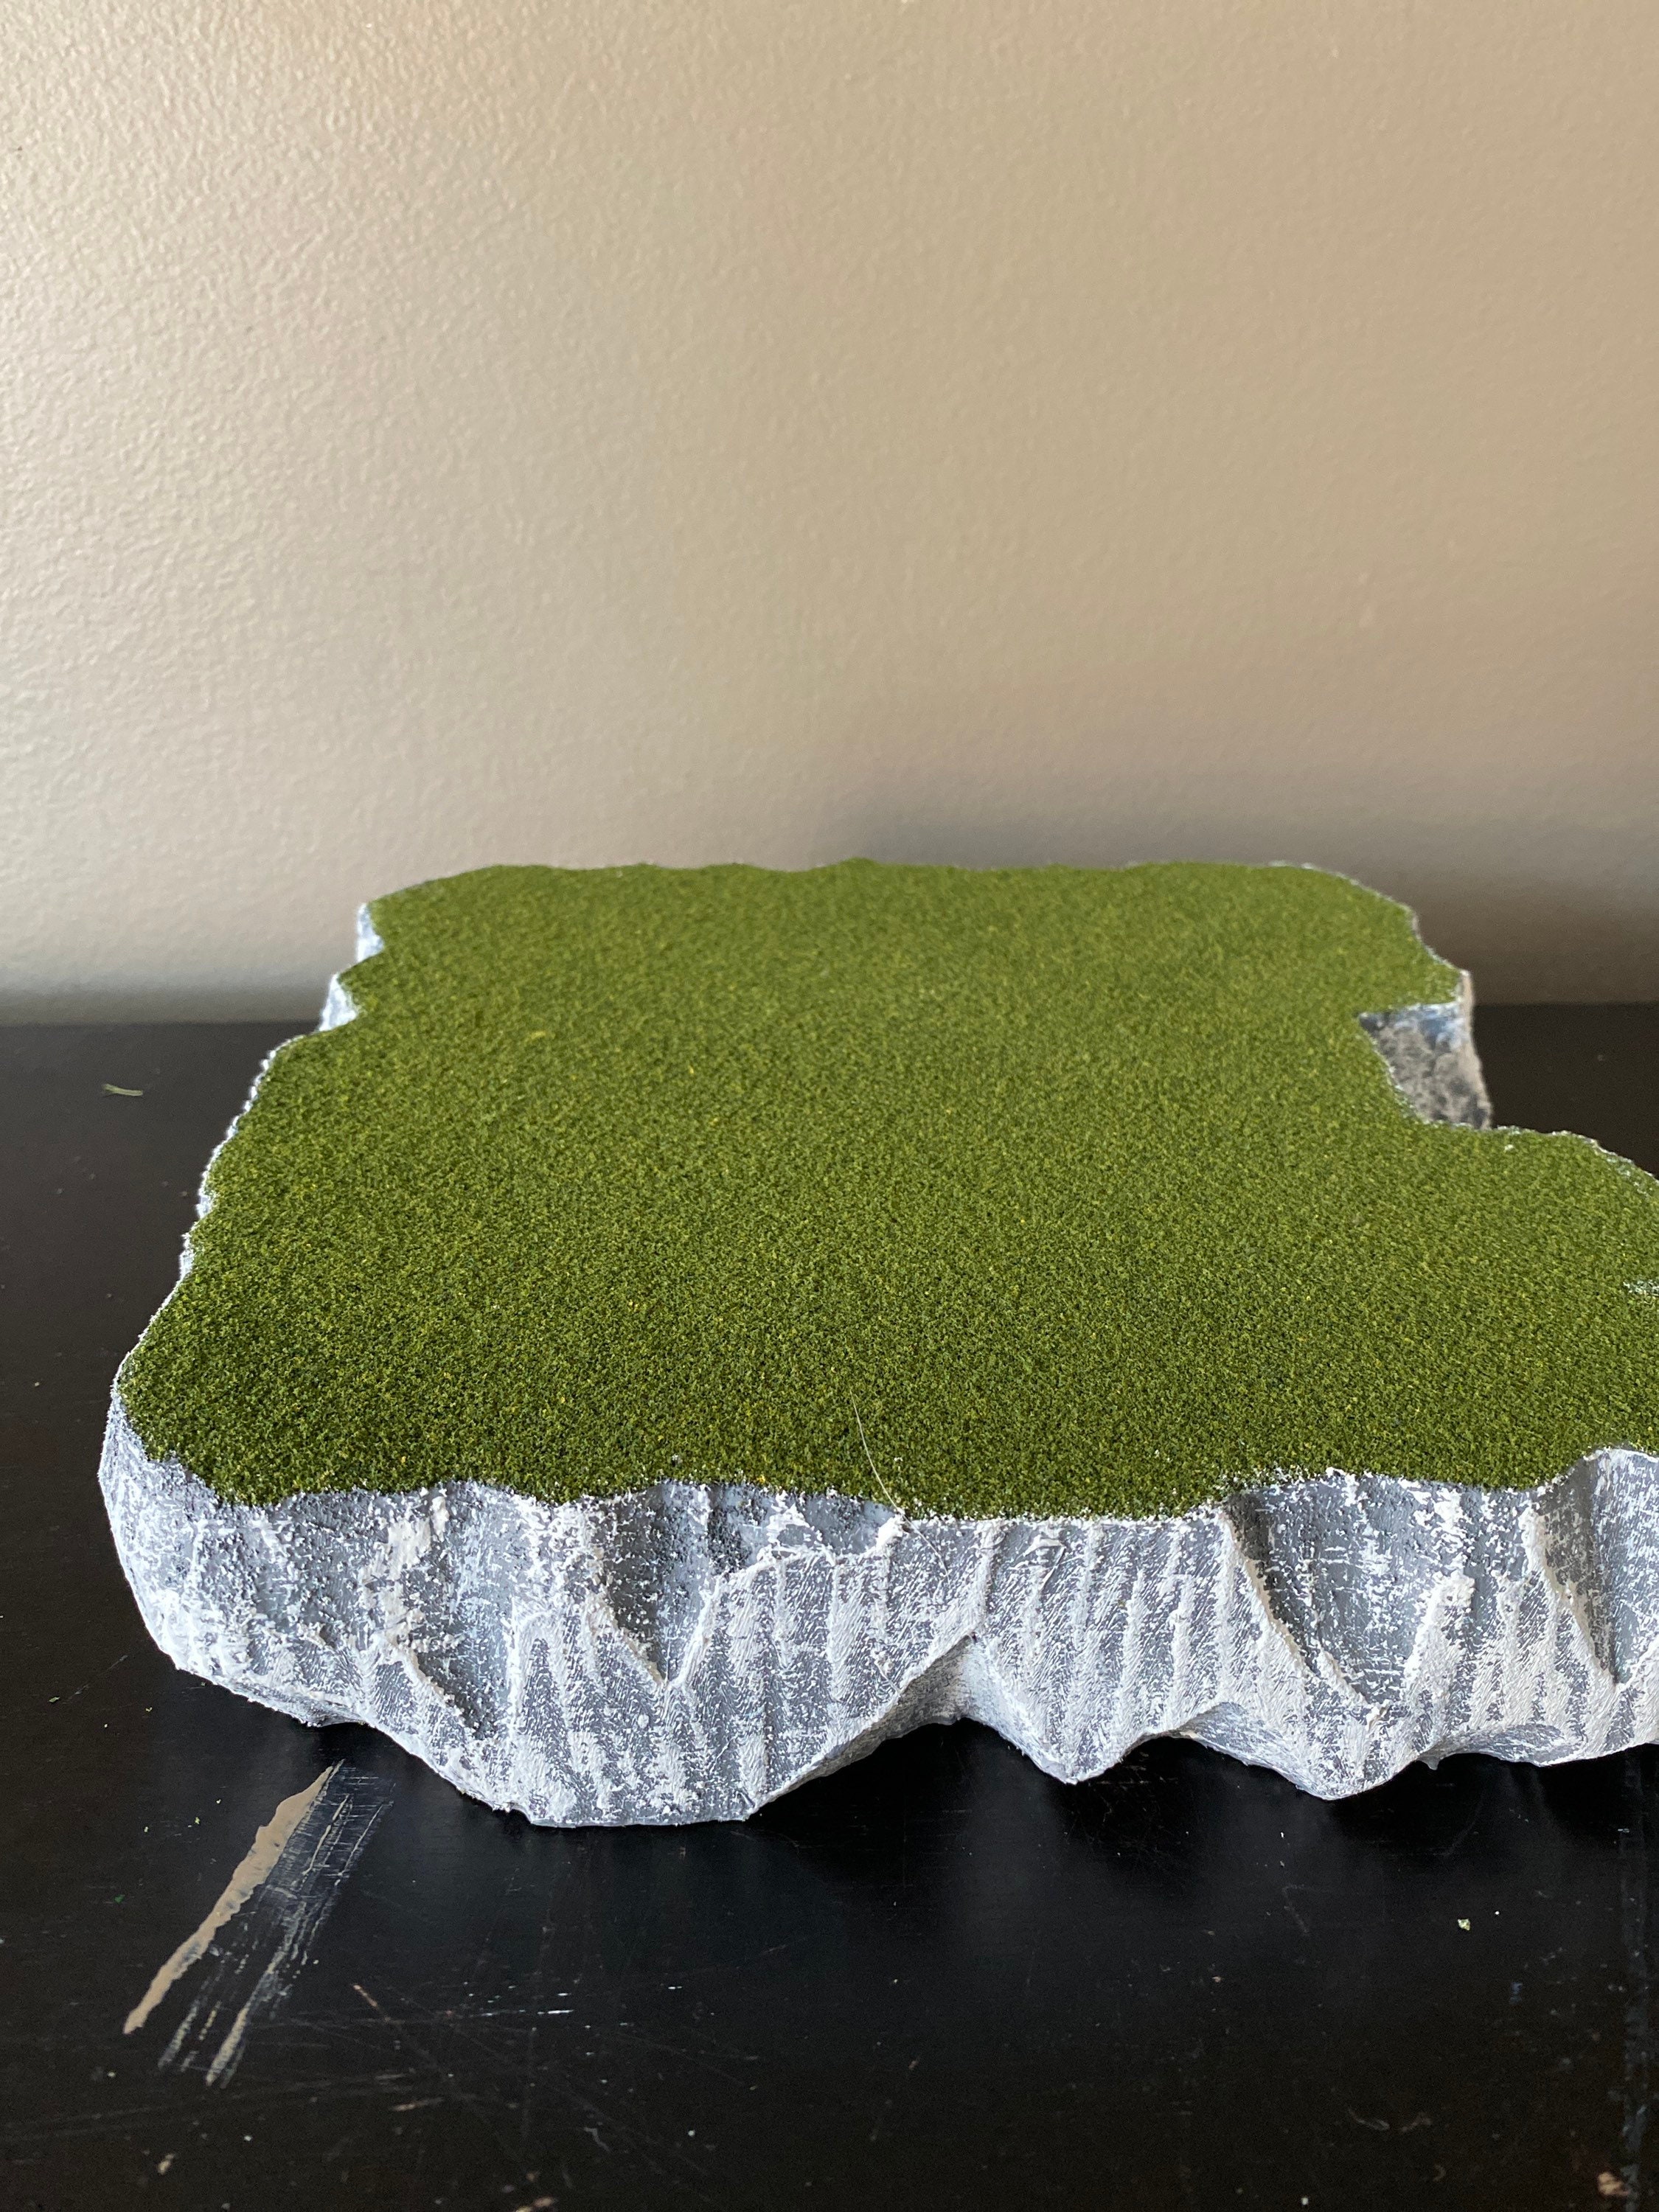 How to Make Fake Grass for a Project